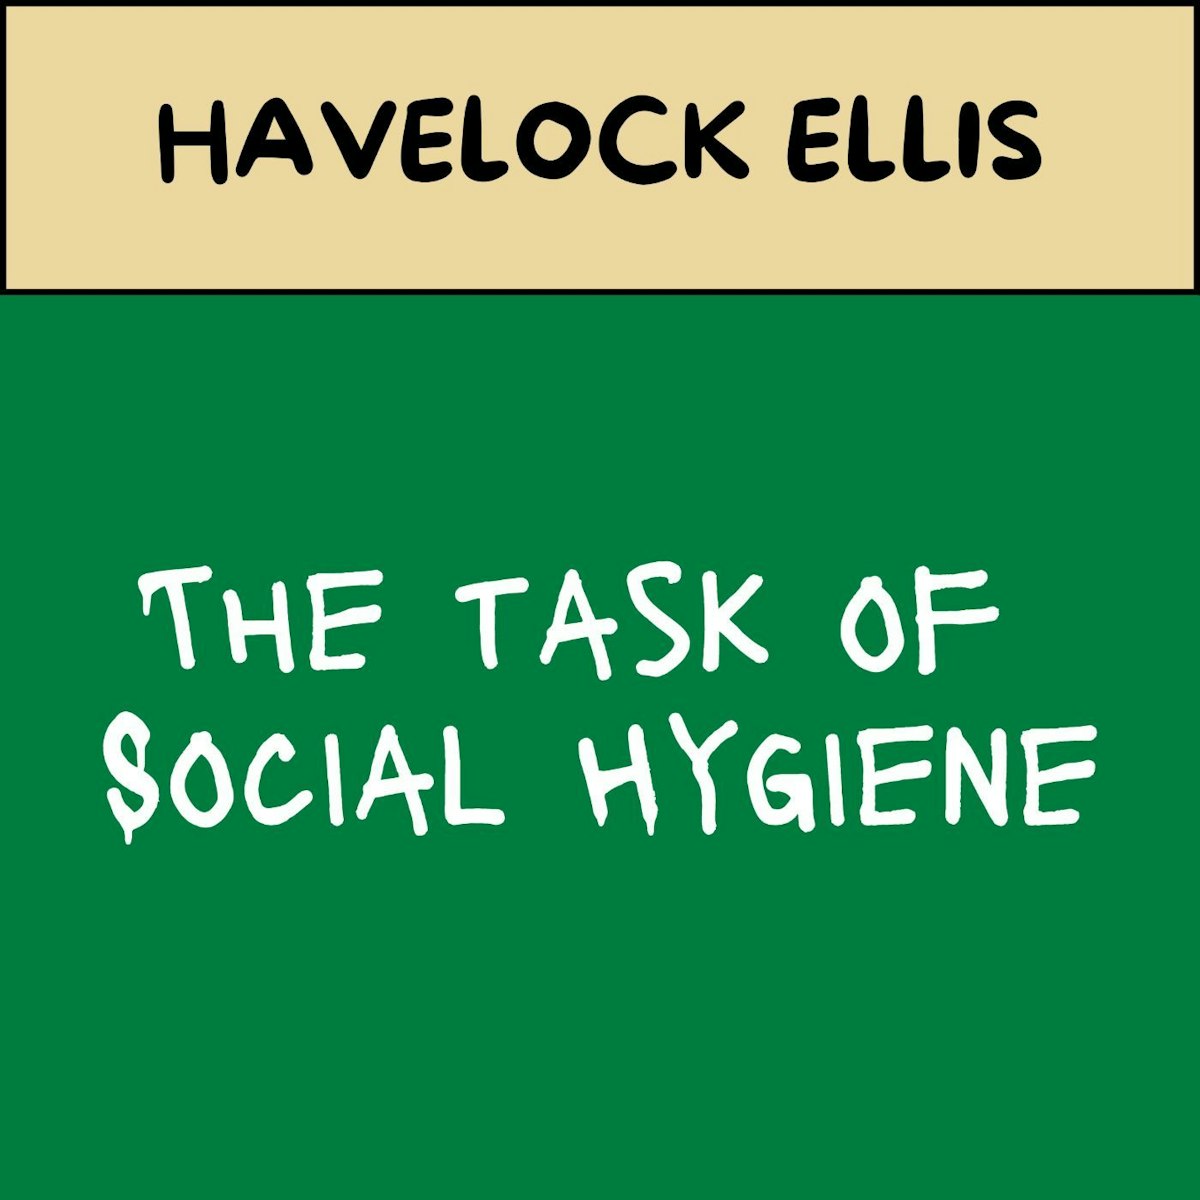 featured image - The study of social hygiene